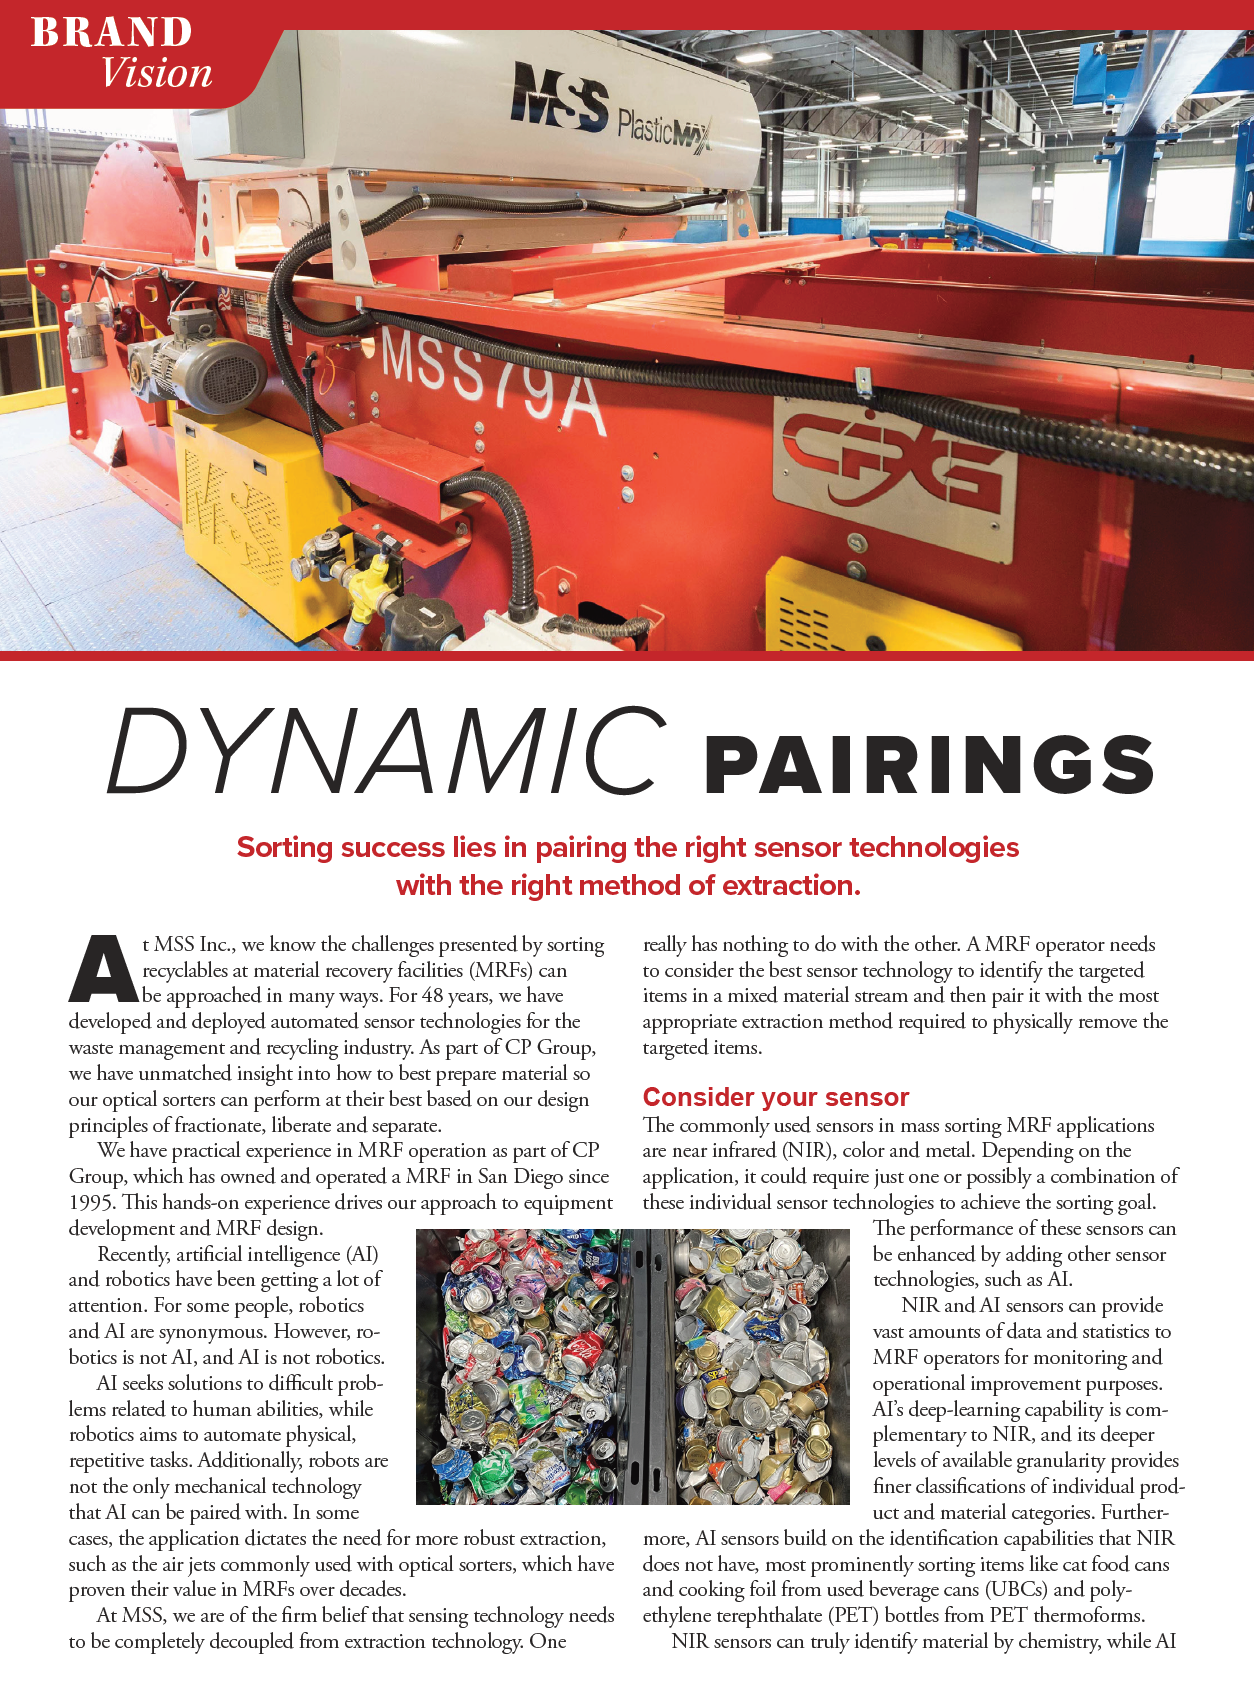 Dynamic Pairings _ Brand Vision article preview